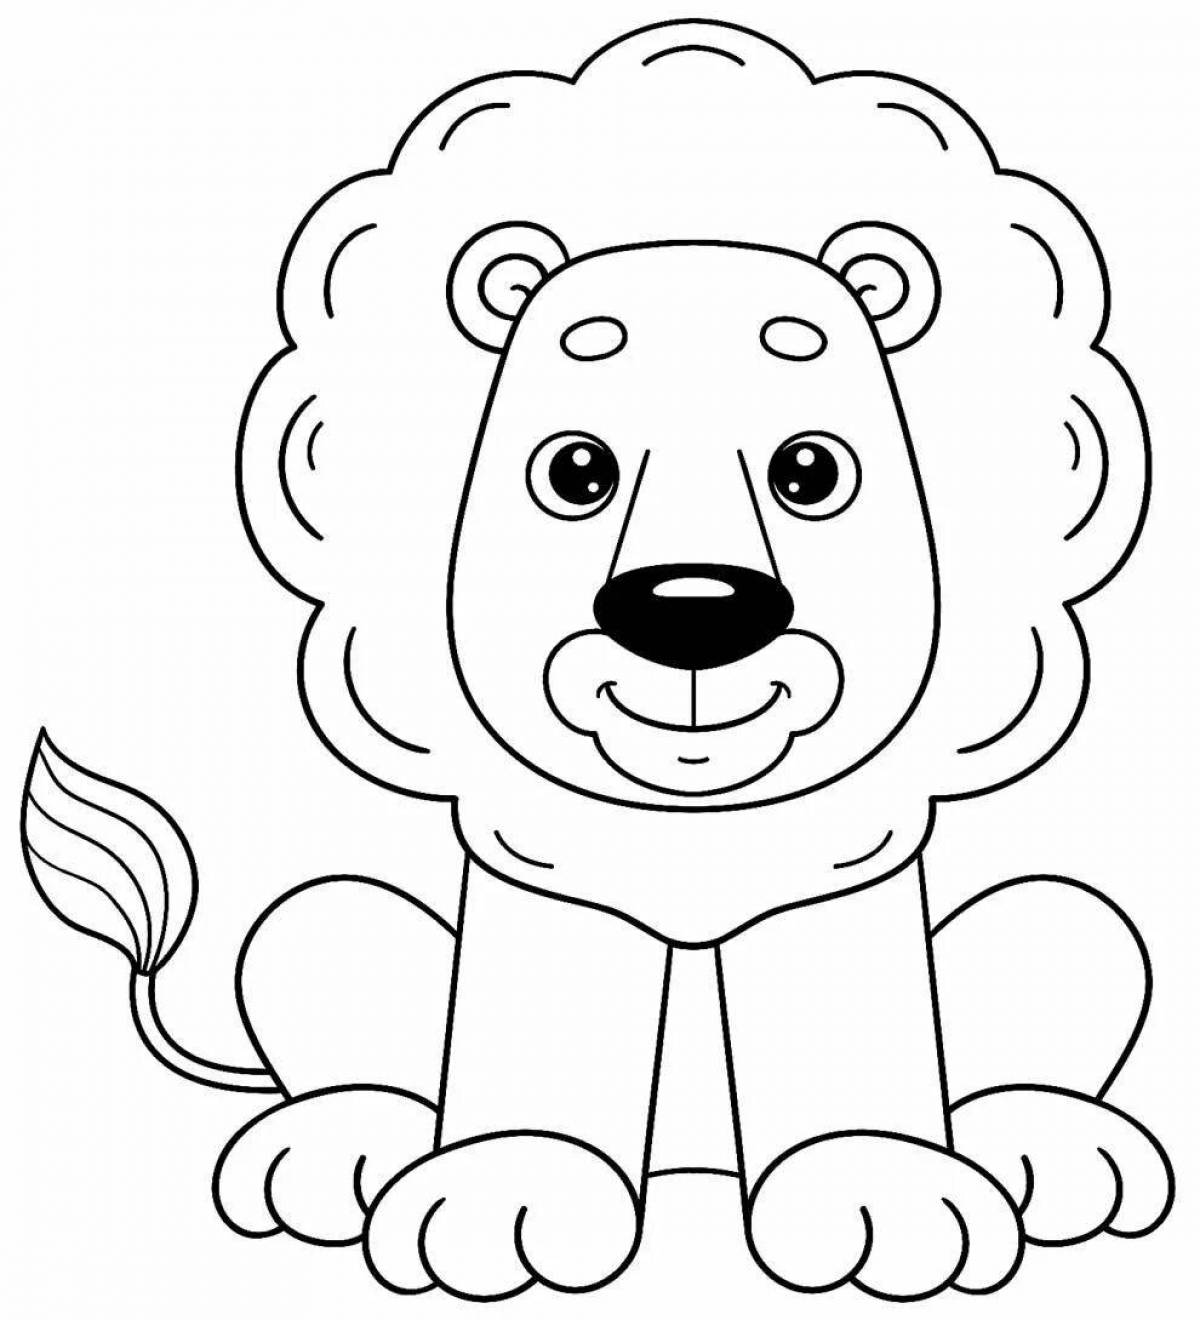 Colorful lion cub coloring page for kids